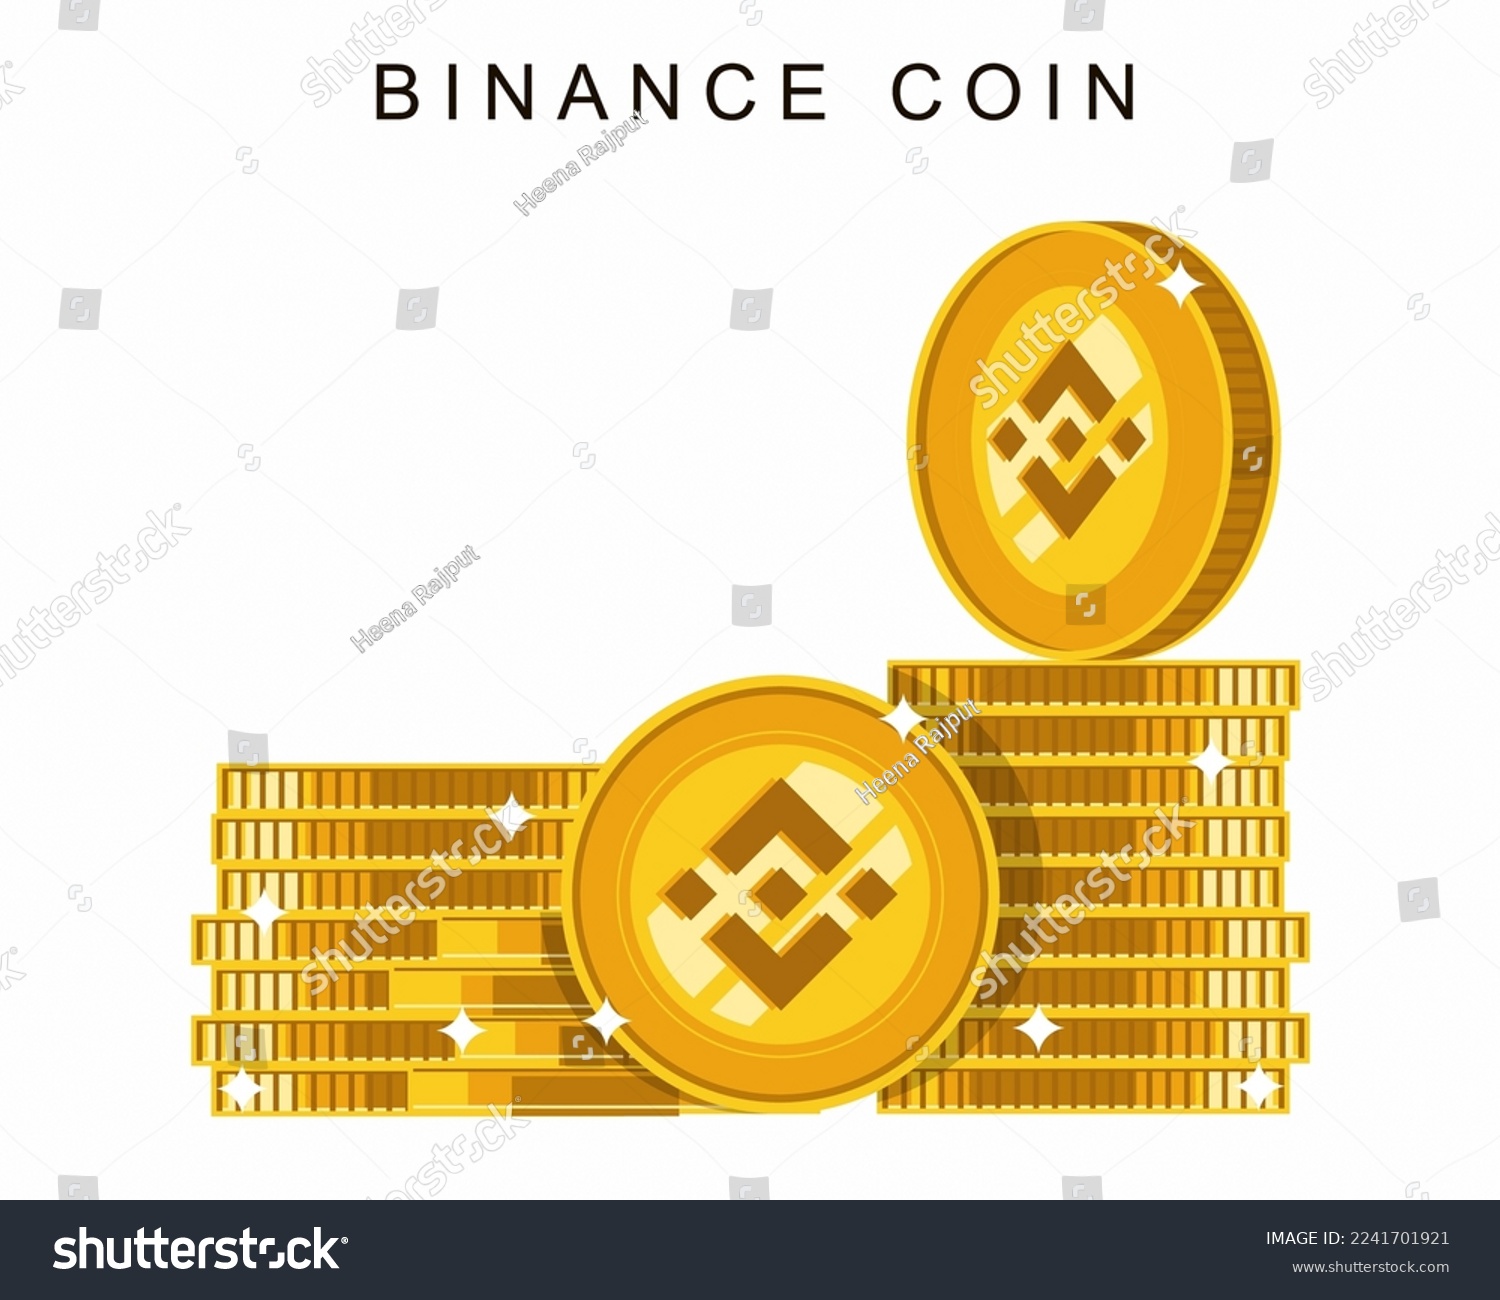 SVG of Binance coin cryptocurrency with pile of coins cryptocurrency concept. svg